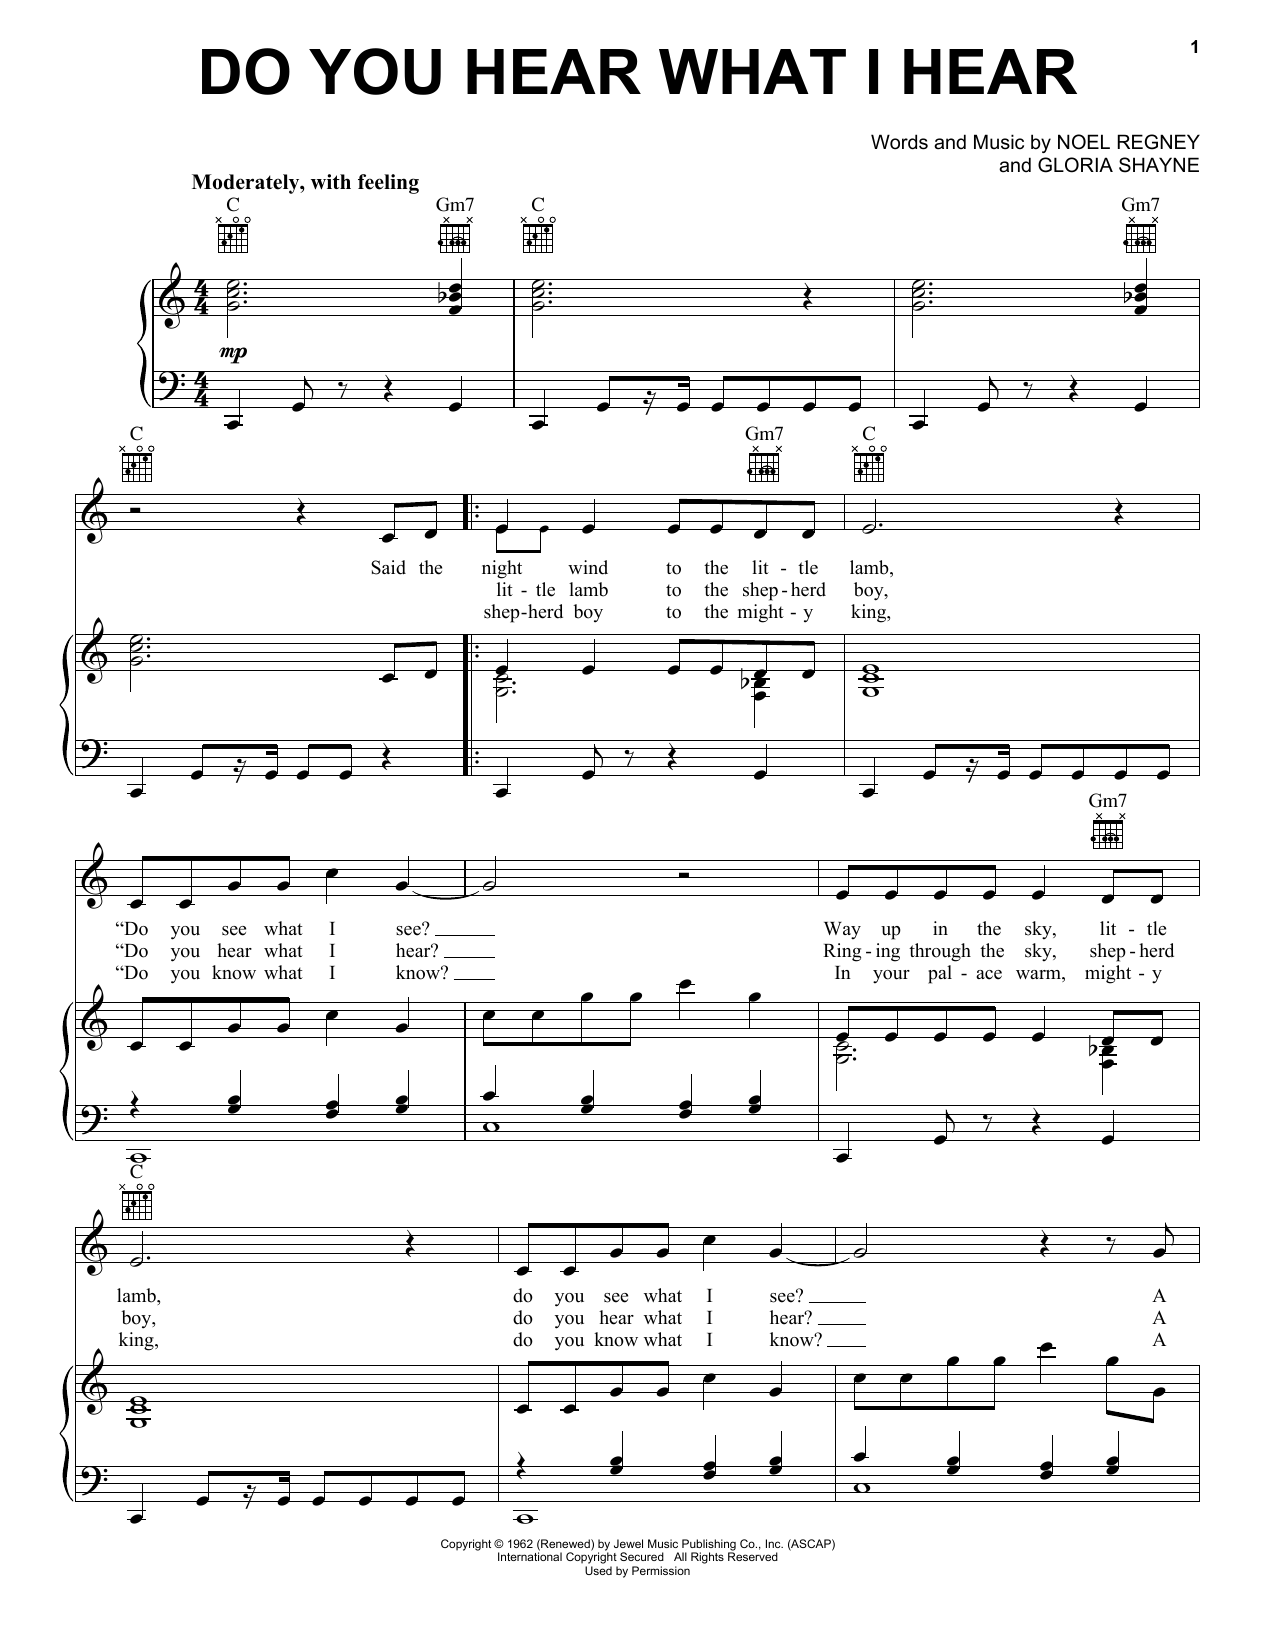 Gloria Shayne Do You Hear What I Hear sheet music notes and chords. Download Printable PDF.